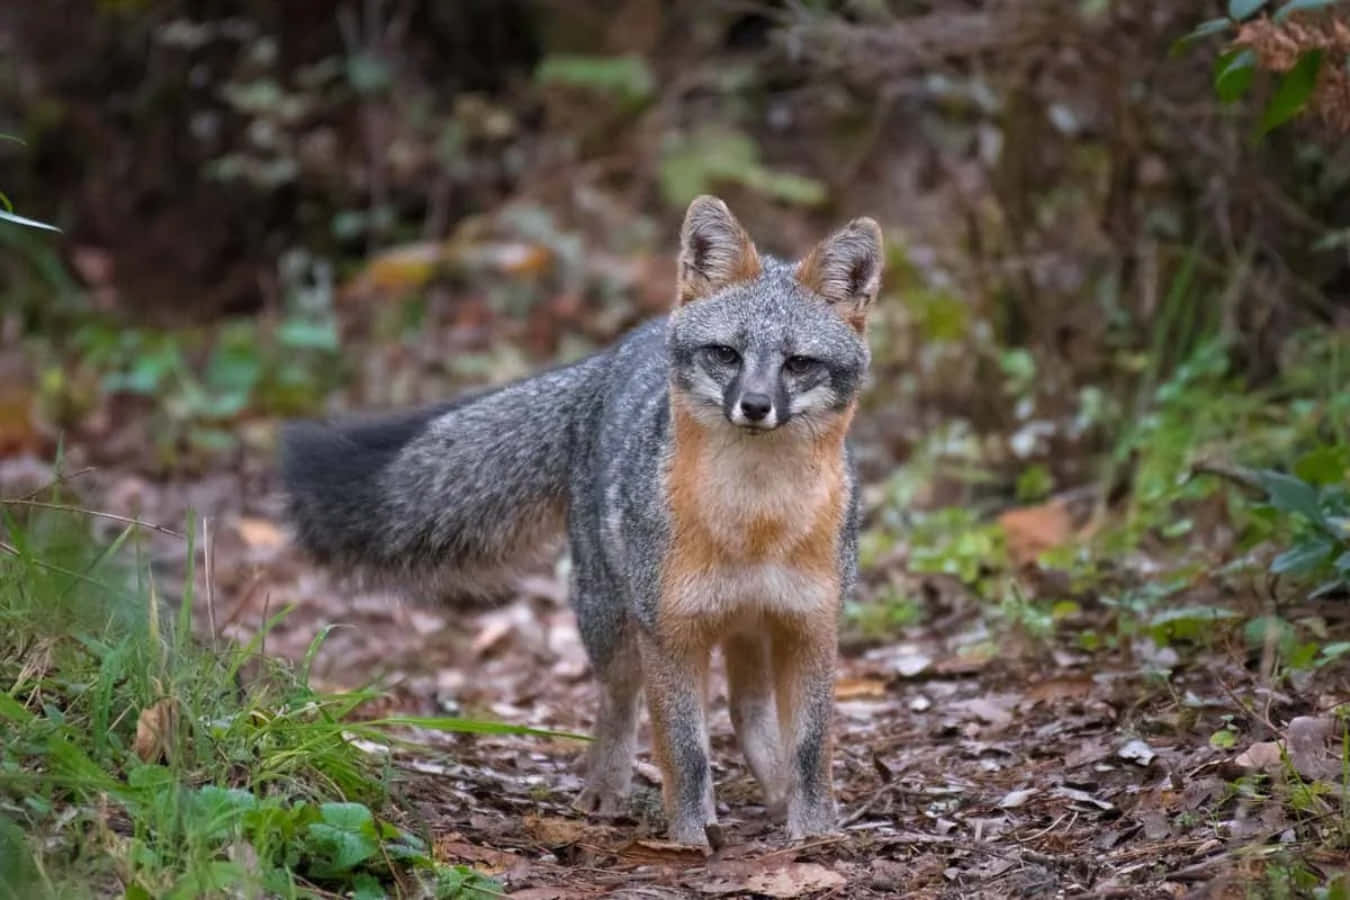 A gorgeous Gray Fox with magnificent eyes